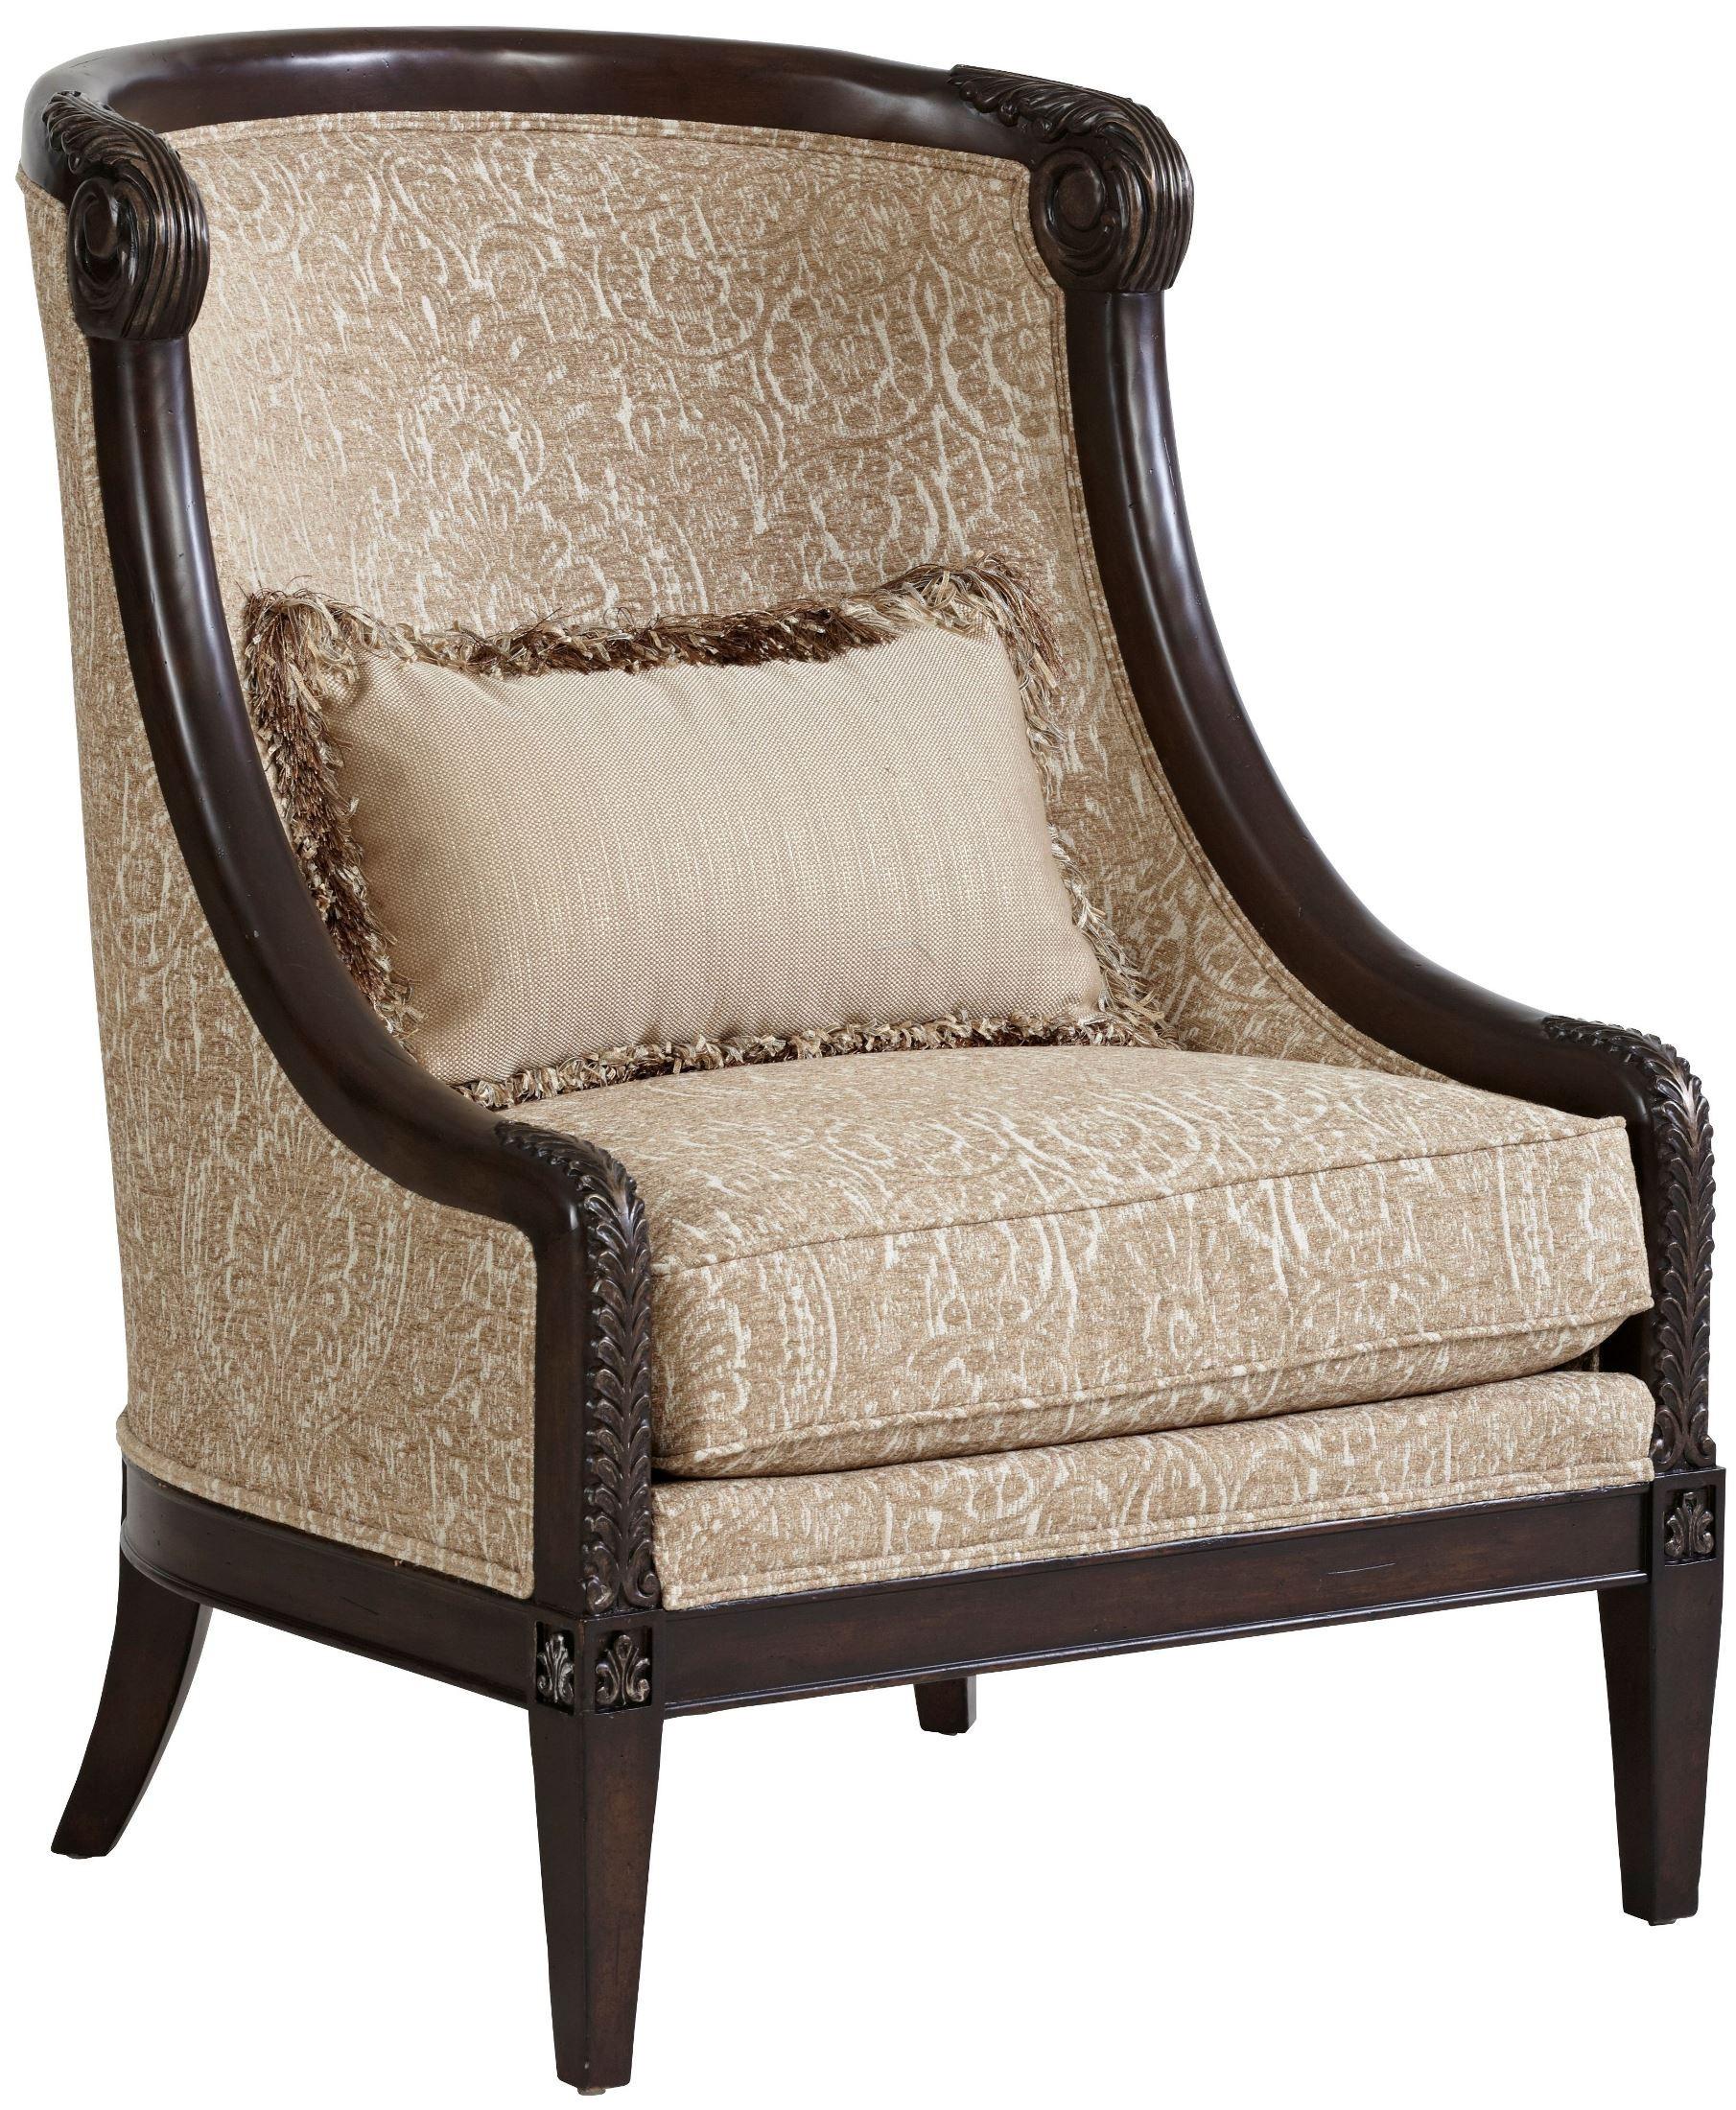 Transitional Arm Chairs Giovanna 509534-5527AB in Brown, Beige Fabric